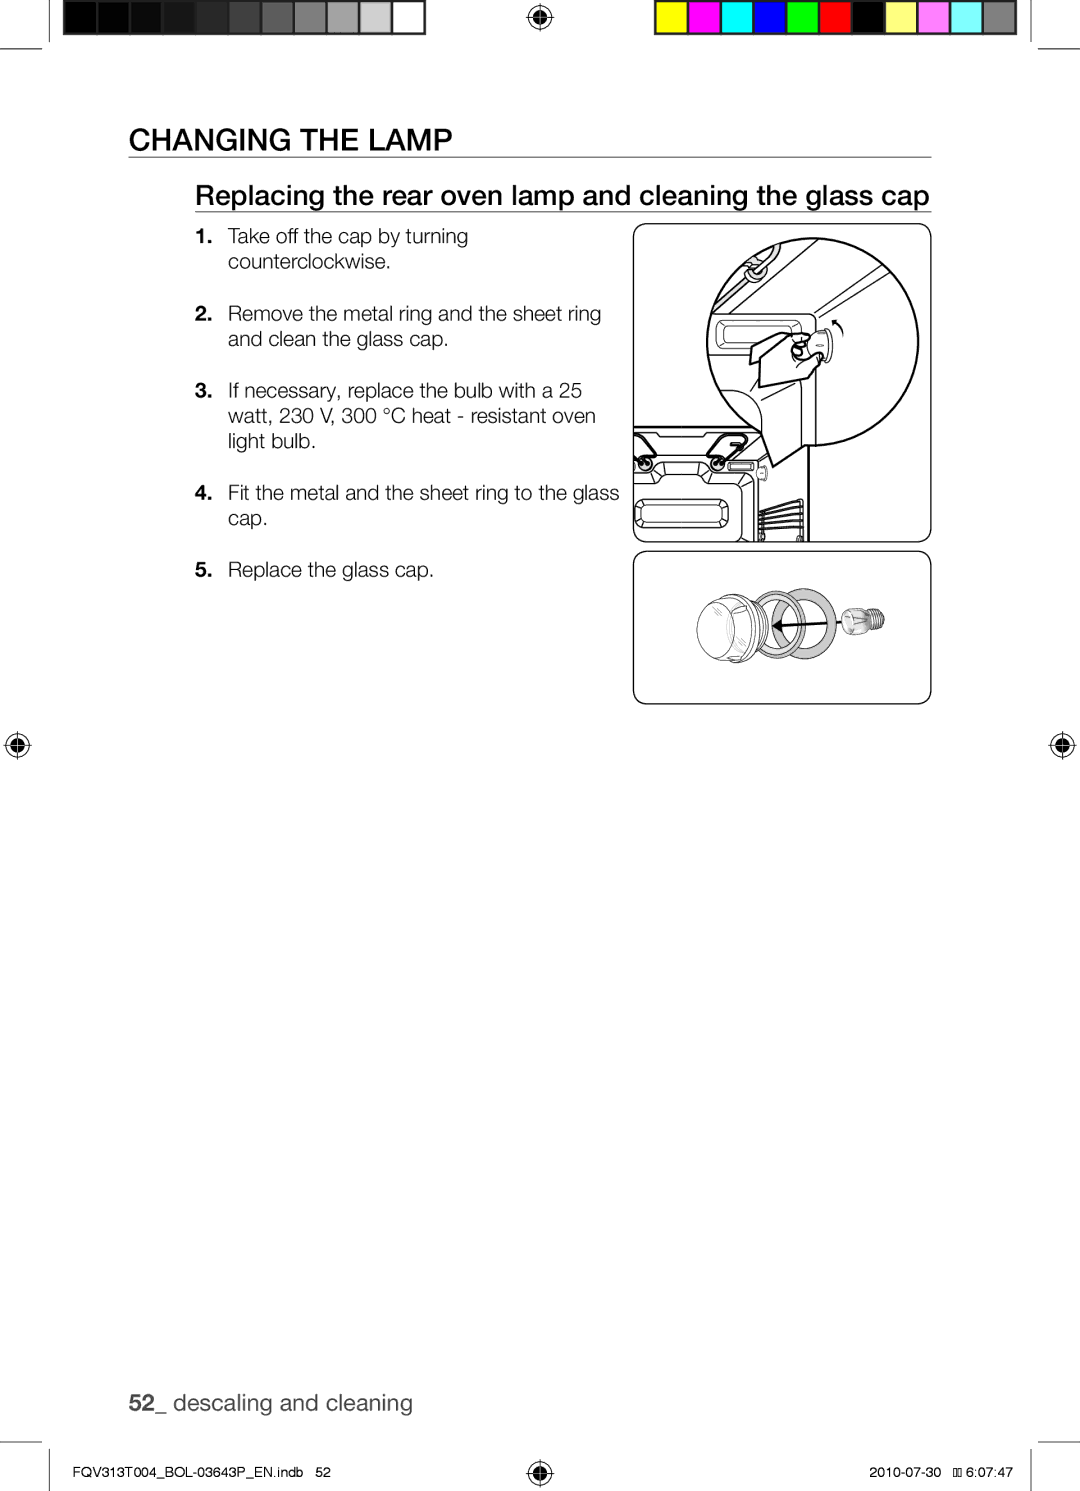 Samsung FQV313T004/BOL manual Changing the lamp, Replacing the rear oven lamp and cleaning the glass cap 